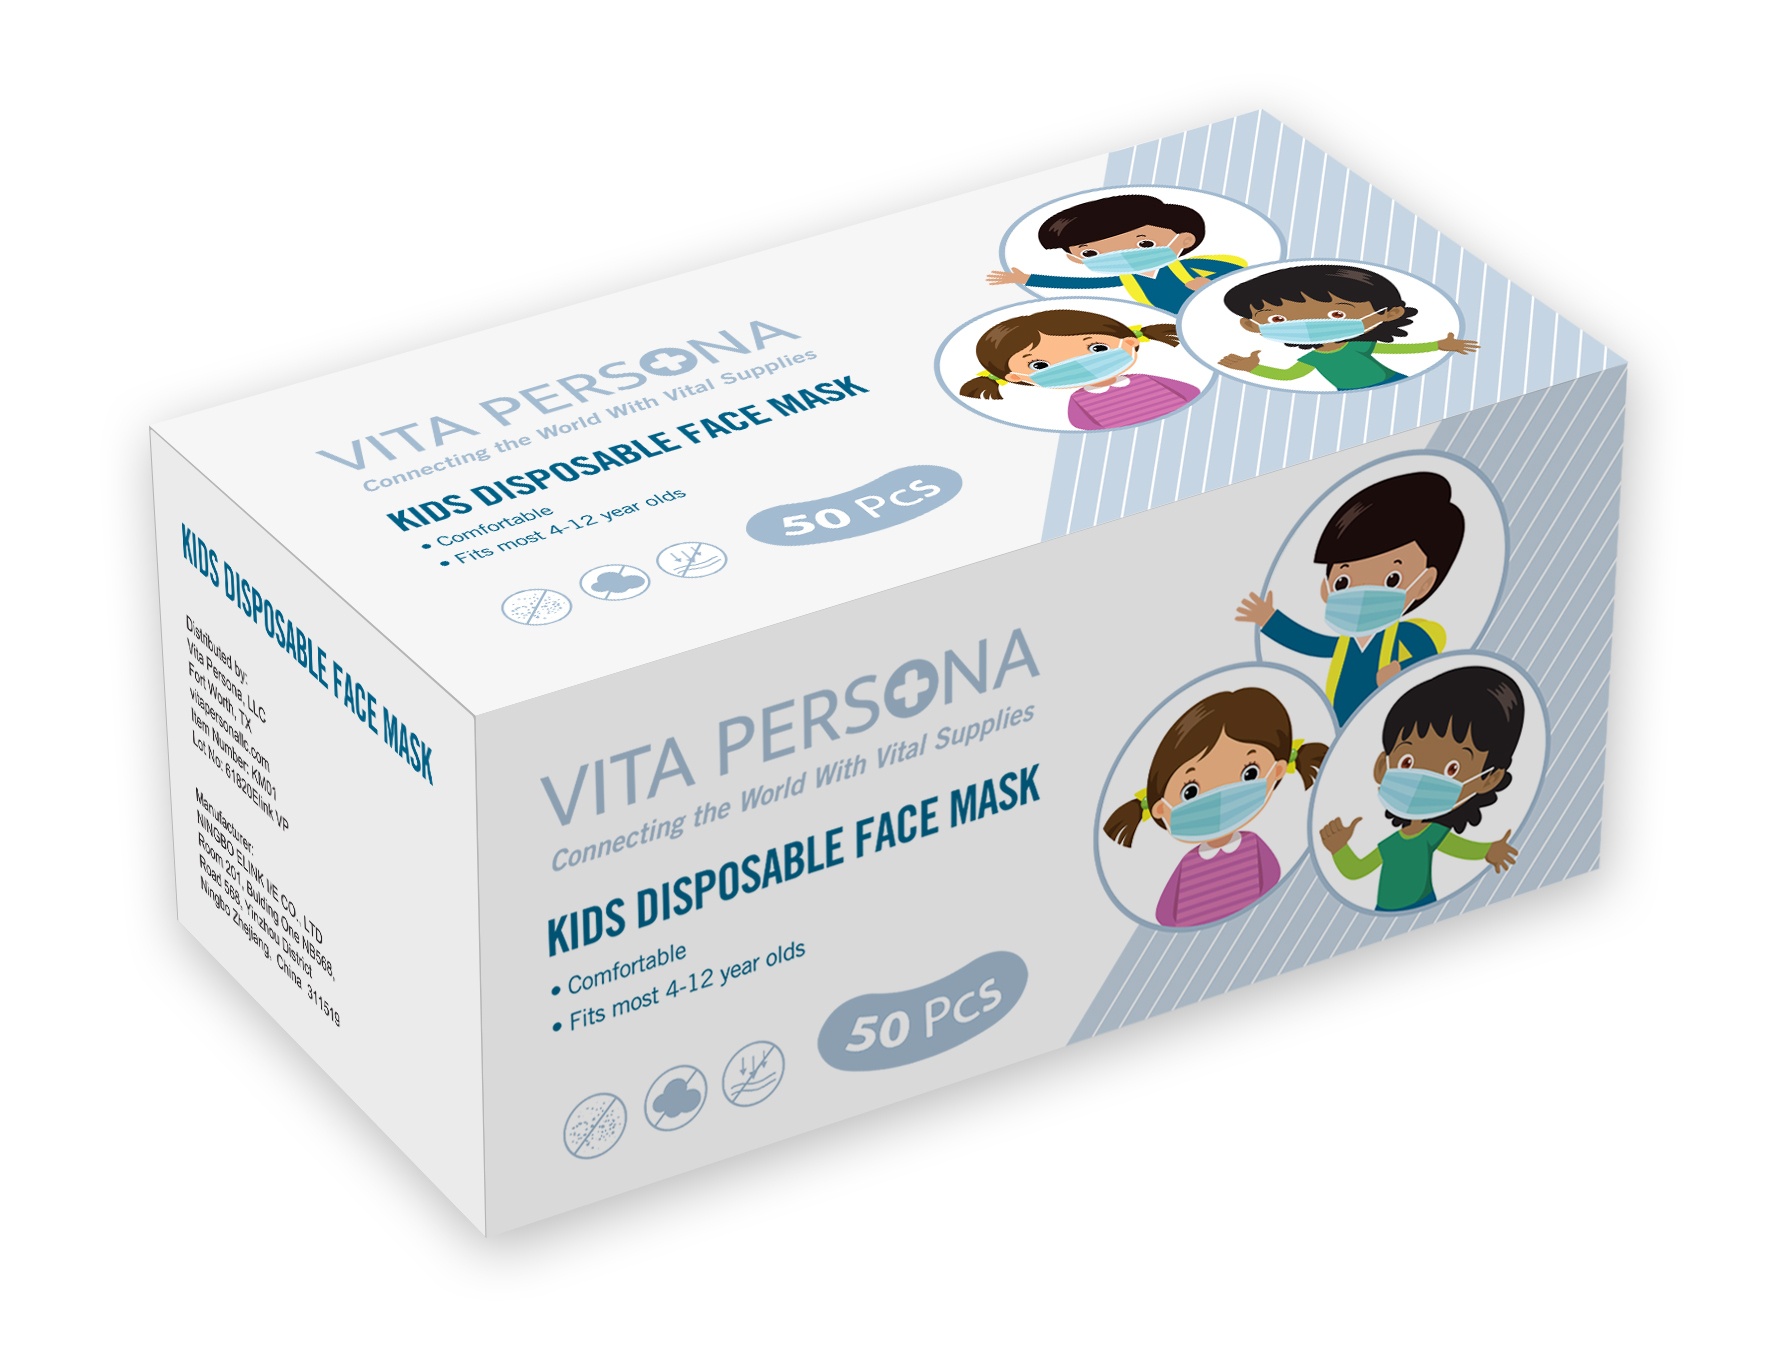 Download Youth Deluxe 3ply Mask Box of 50 ($0.29/pc) - Vita Persona ...